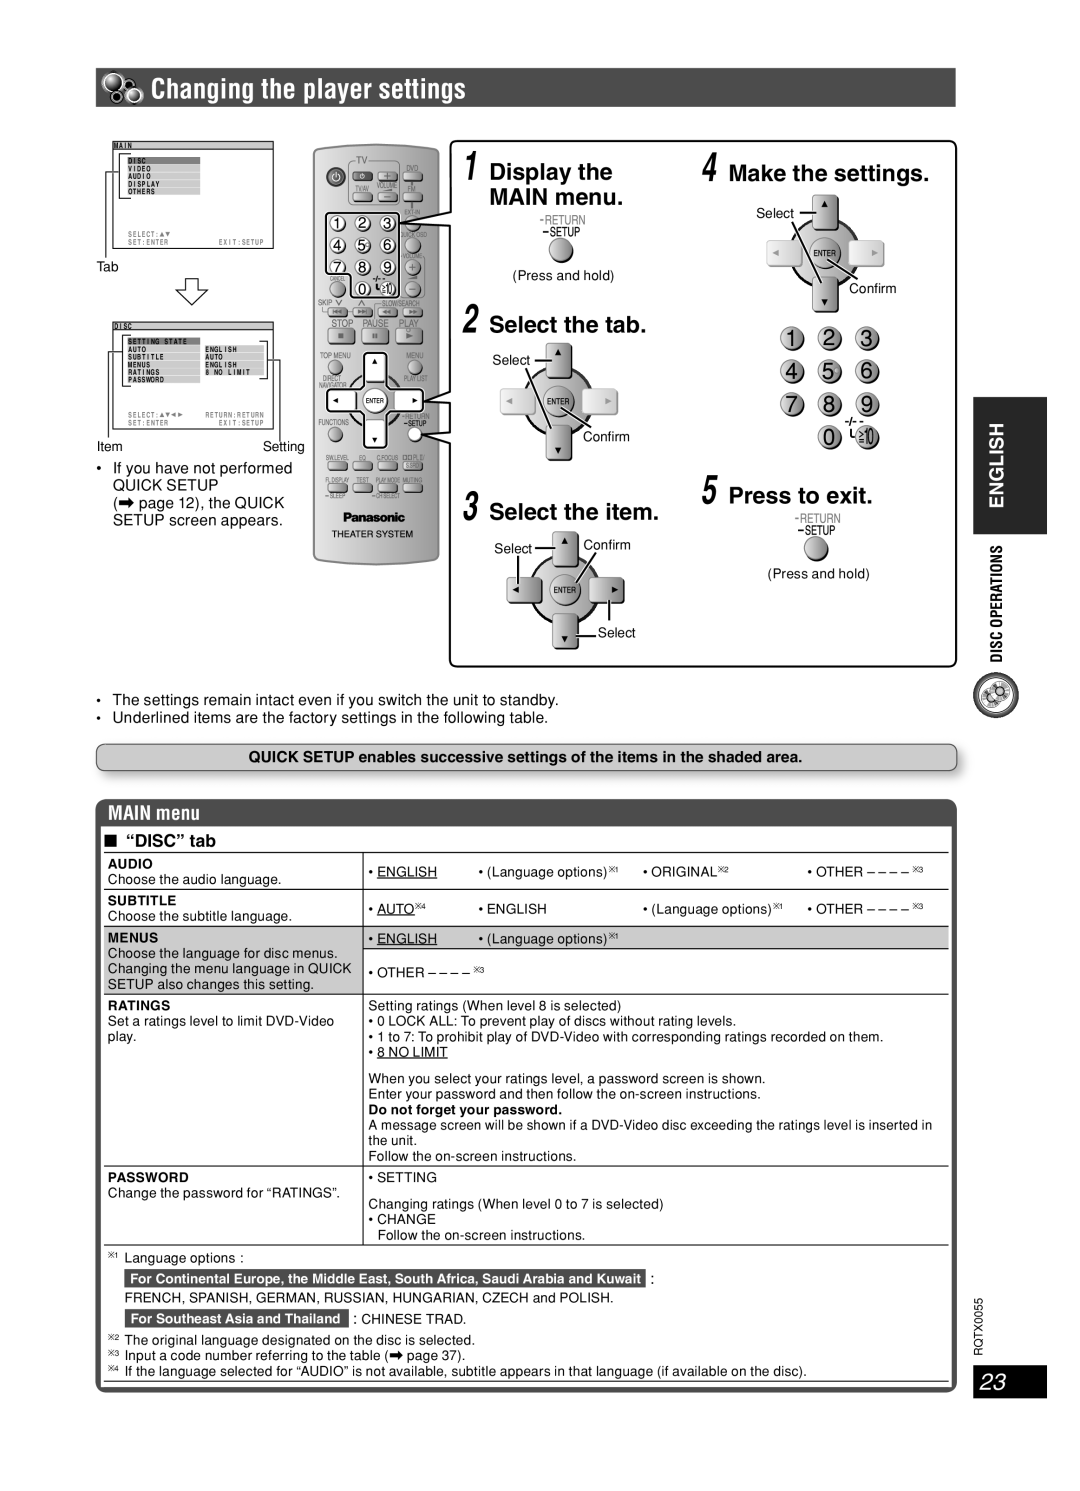 Panasonic SC-PT 250 Changing the player settings, Display the MAIN menu, Select the tab, Select the item, Press to exit 